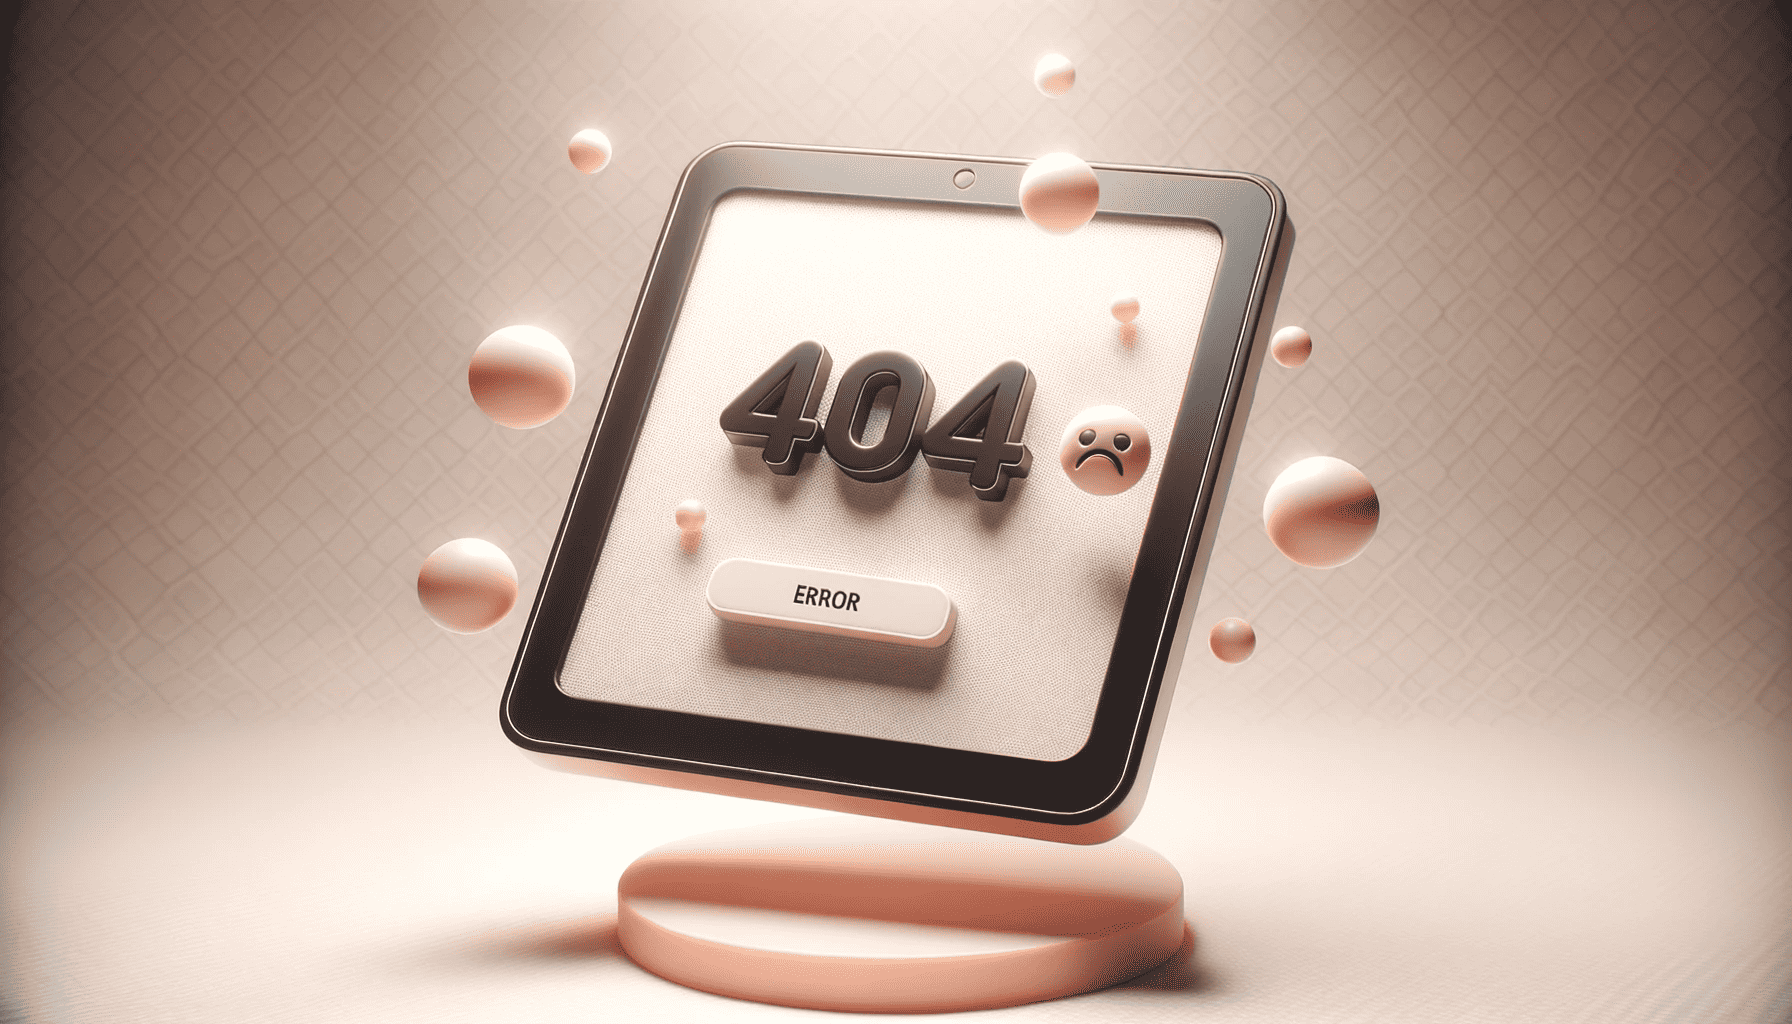 A tablet device displaying an HTTP 404 error